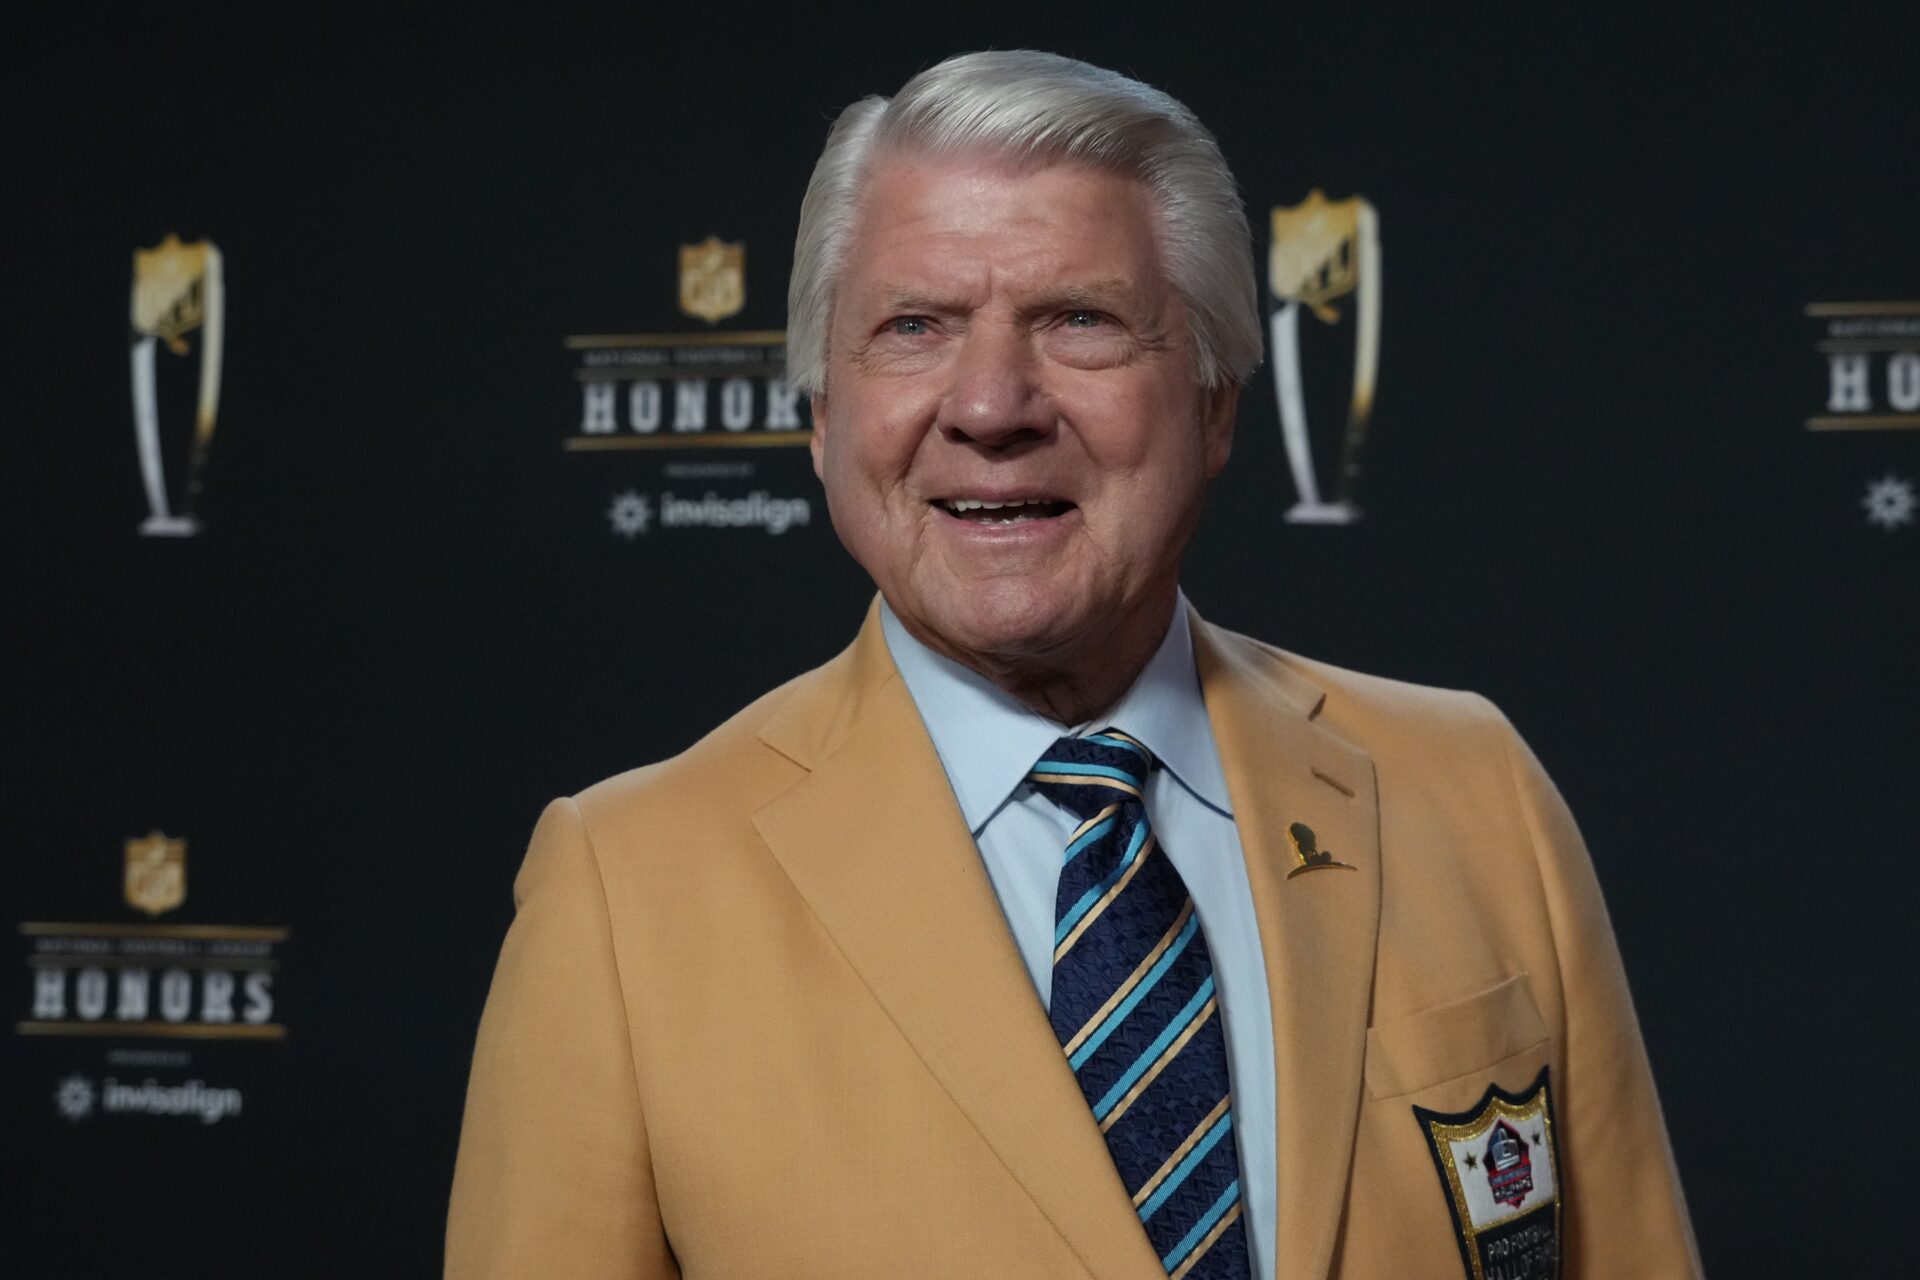 Former football coach Jimmy Johnson poses for a photo on the red carpet before the NFL Honors award show at Symphony Hall.